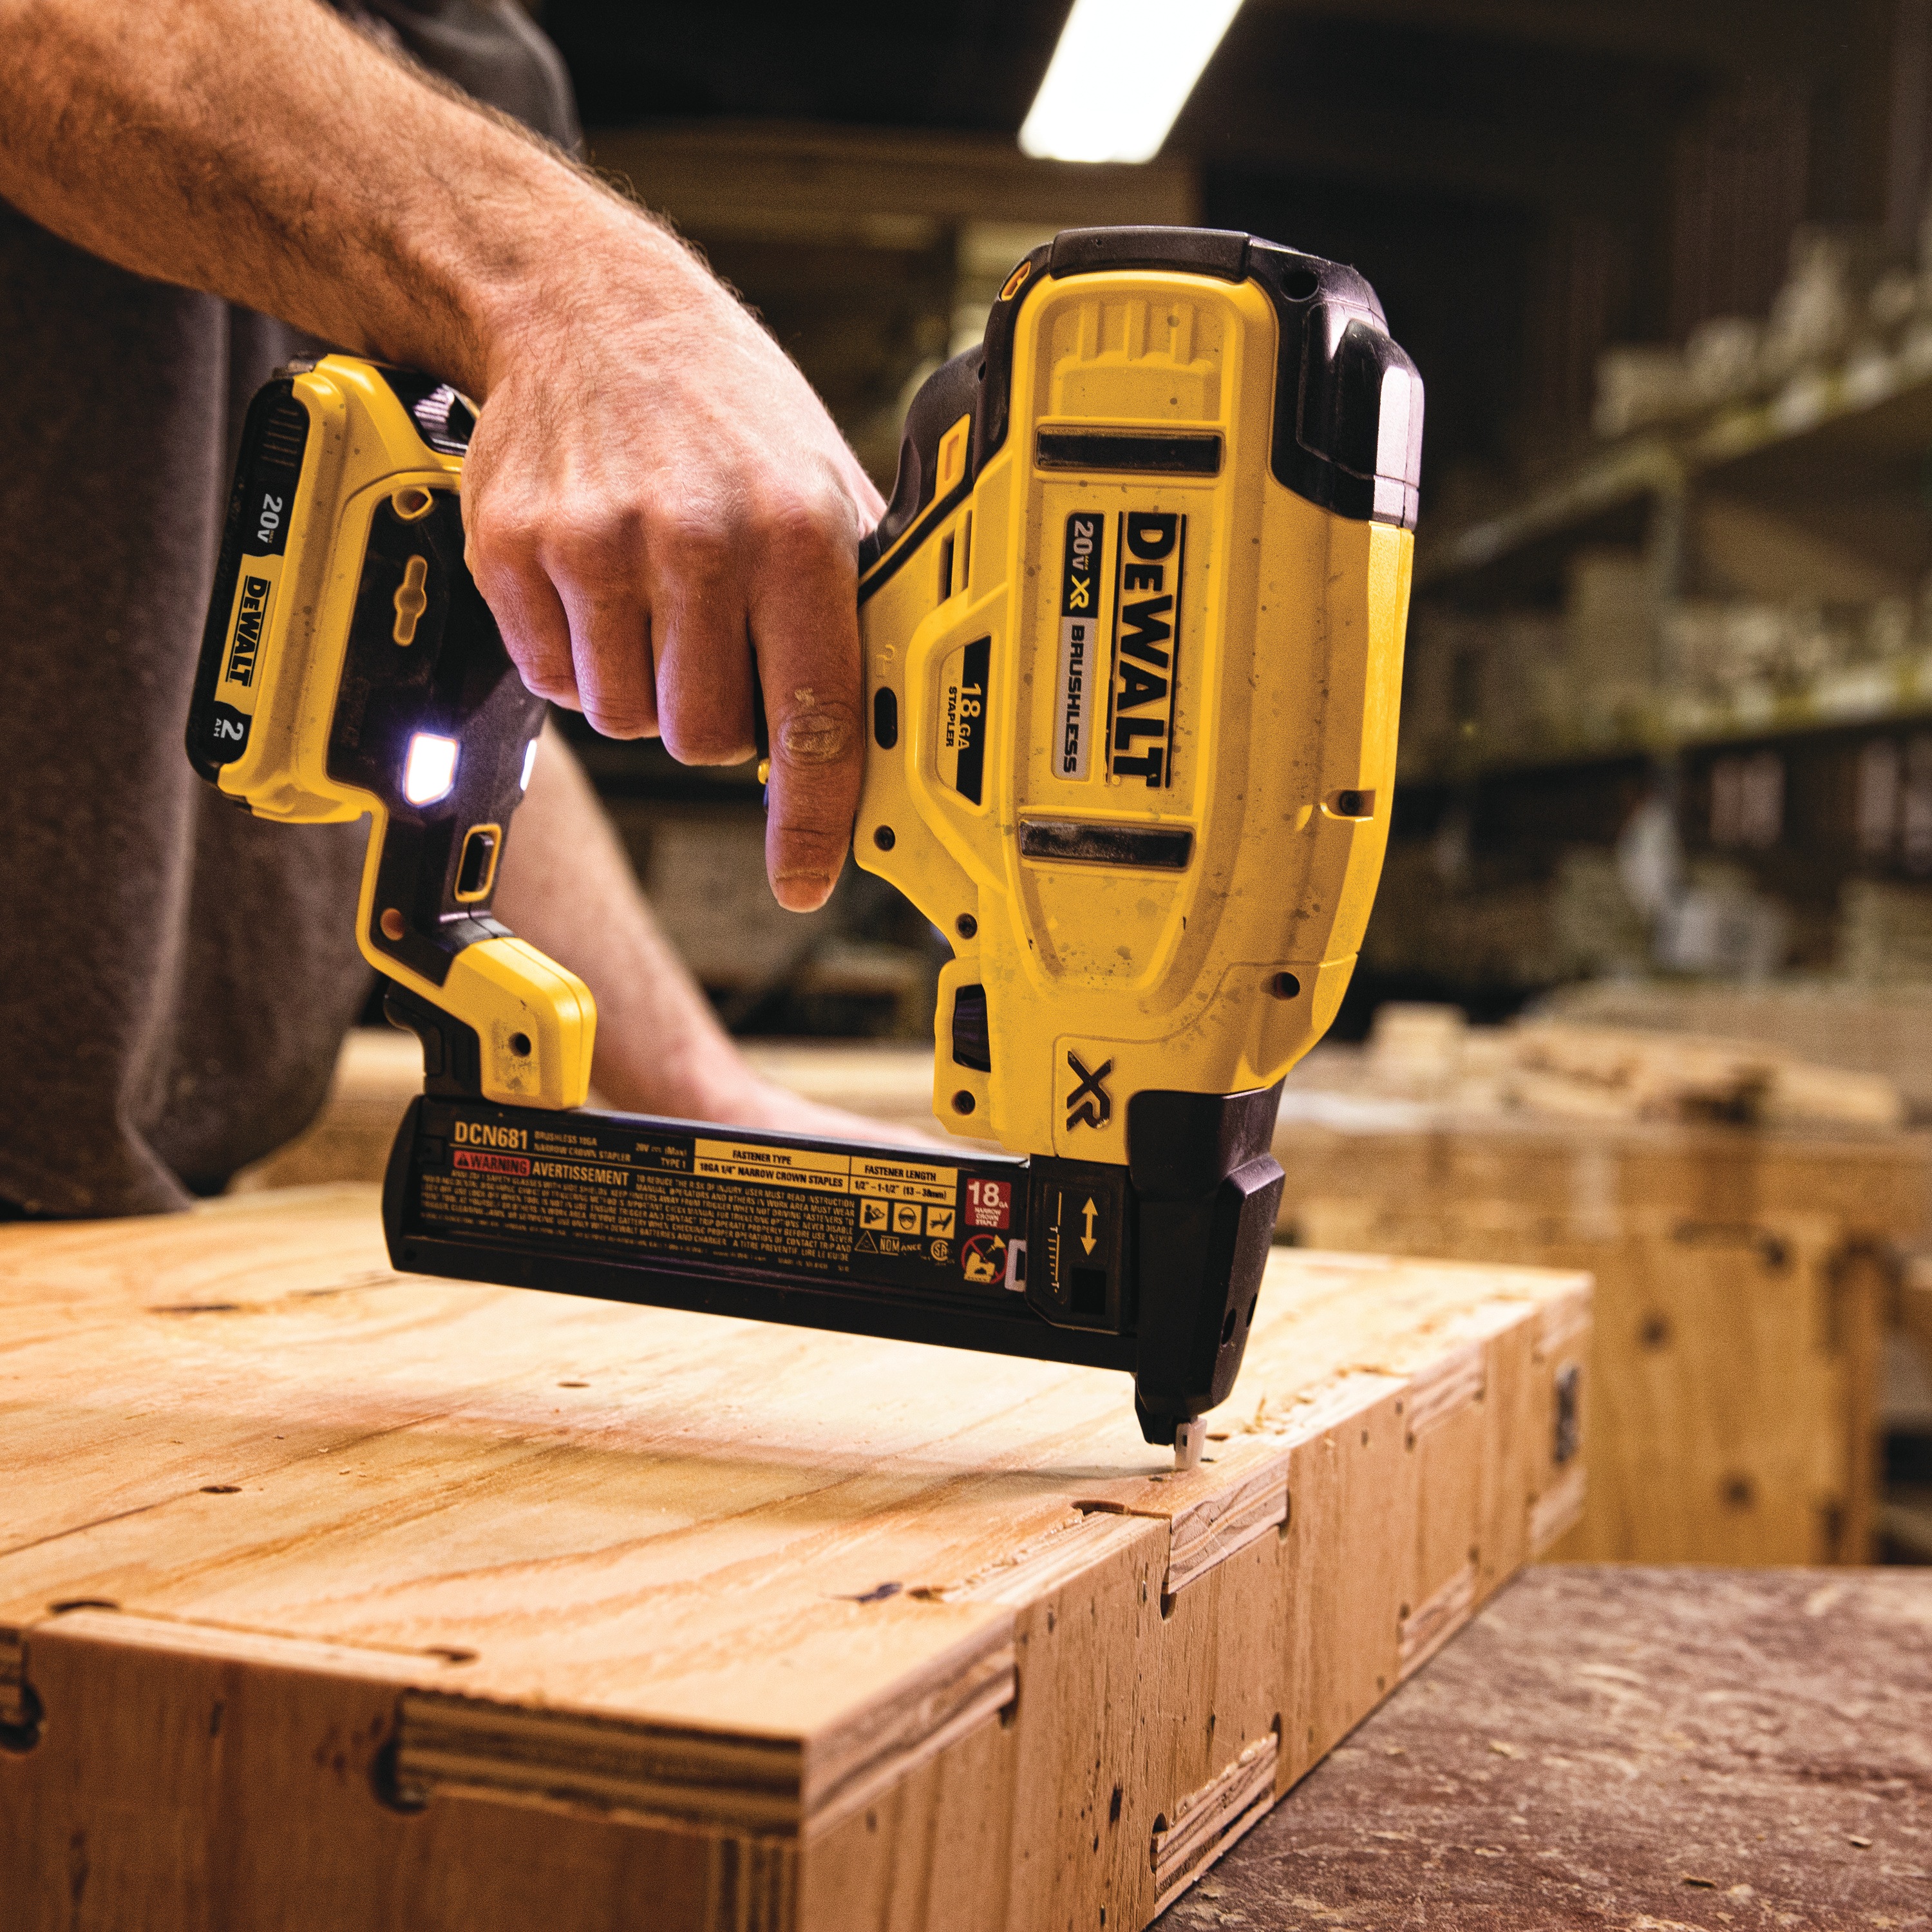 XR 18 gauge Cordless Narrow Crown Stapler in action on a wooden board at a construction site